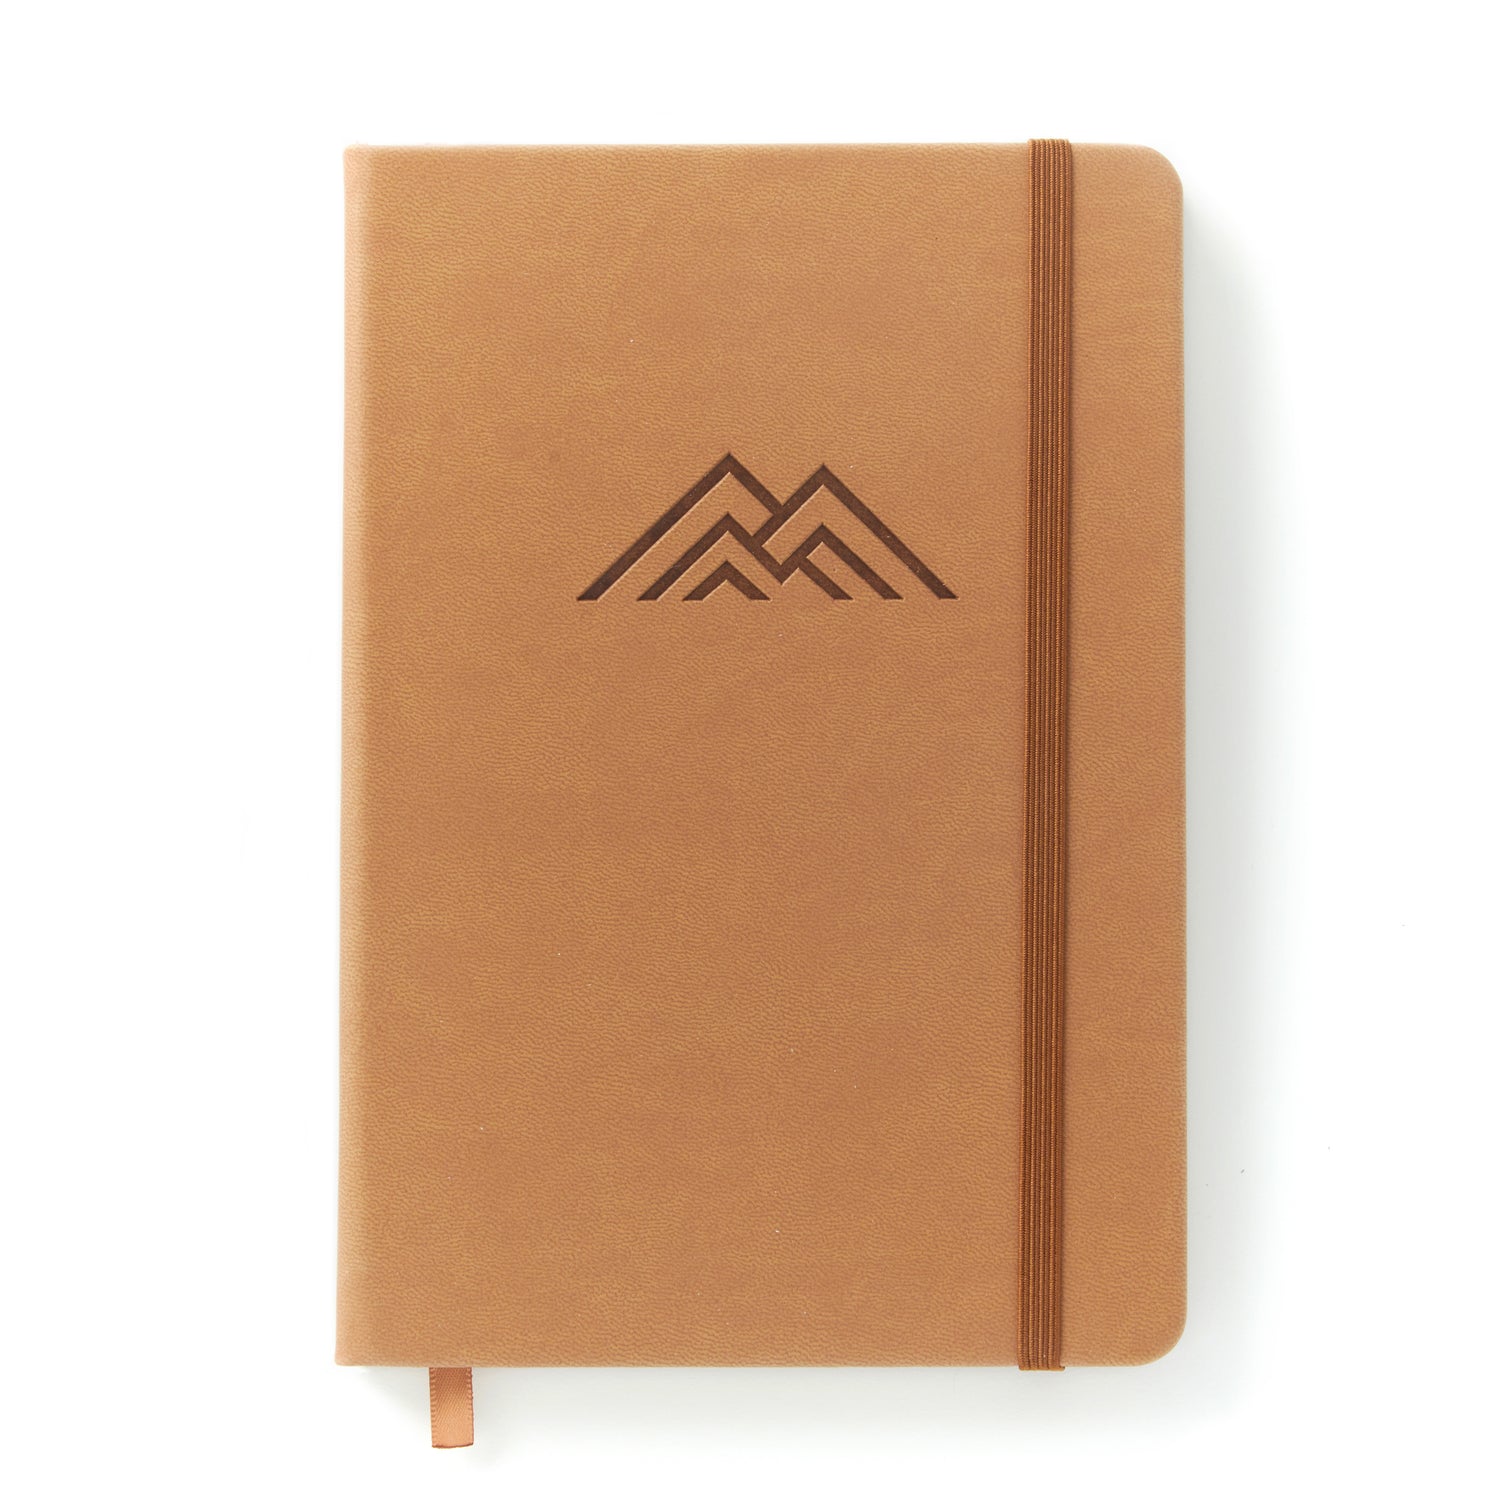 Embracing Digital Minimalism with a Password Book